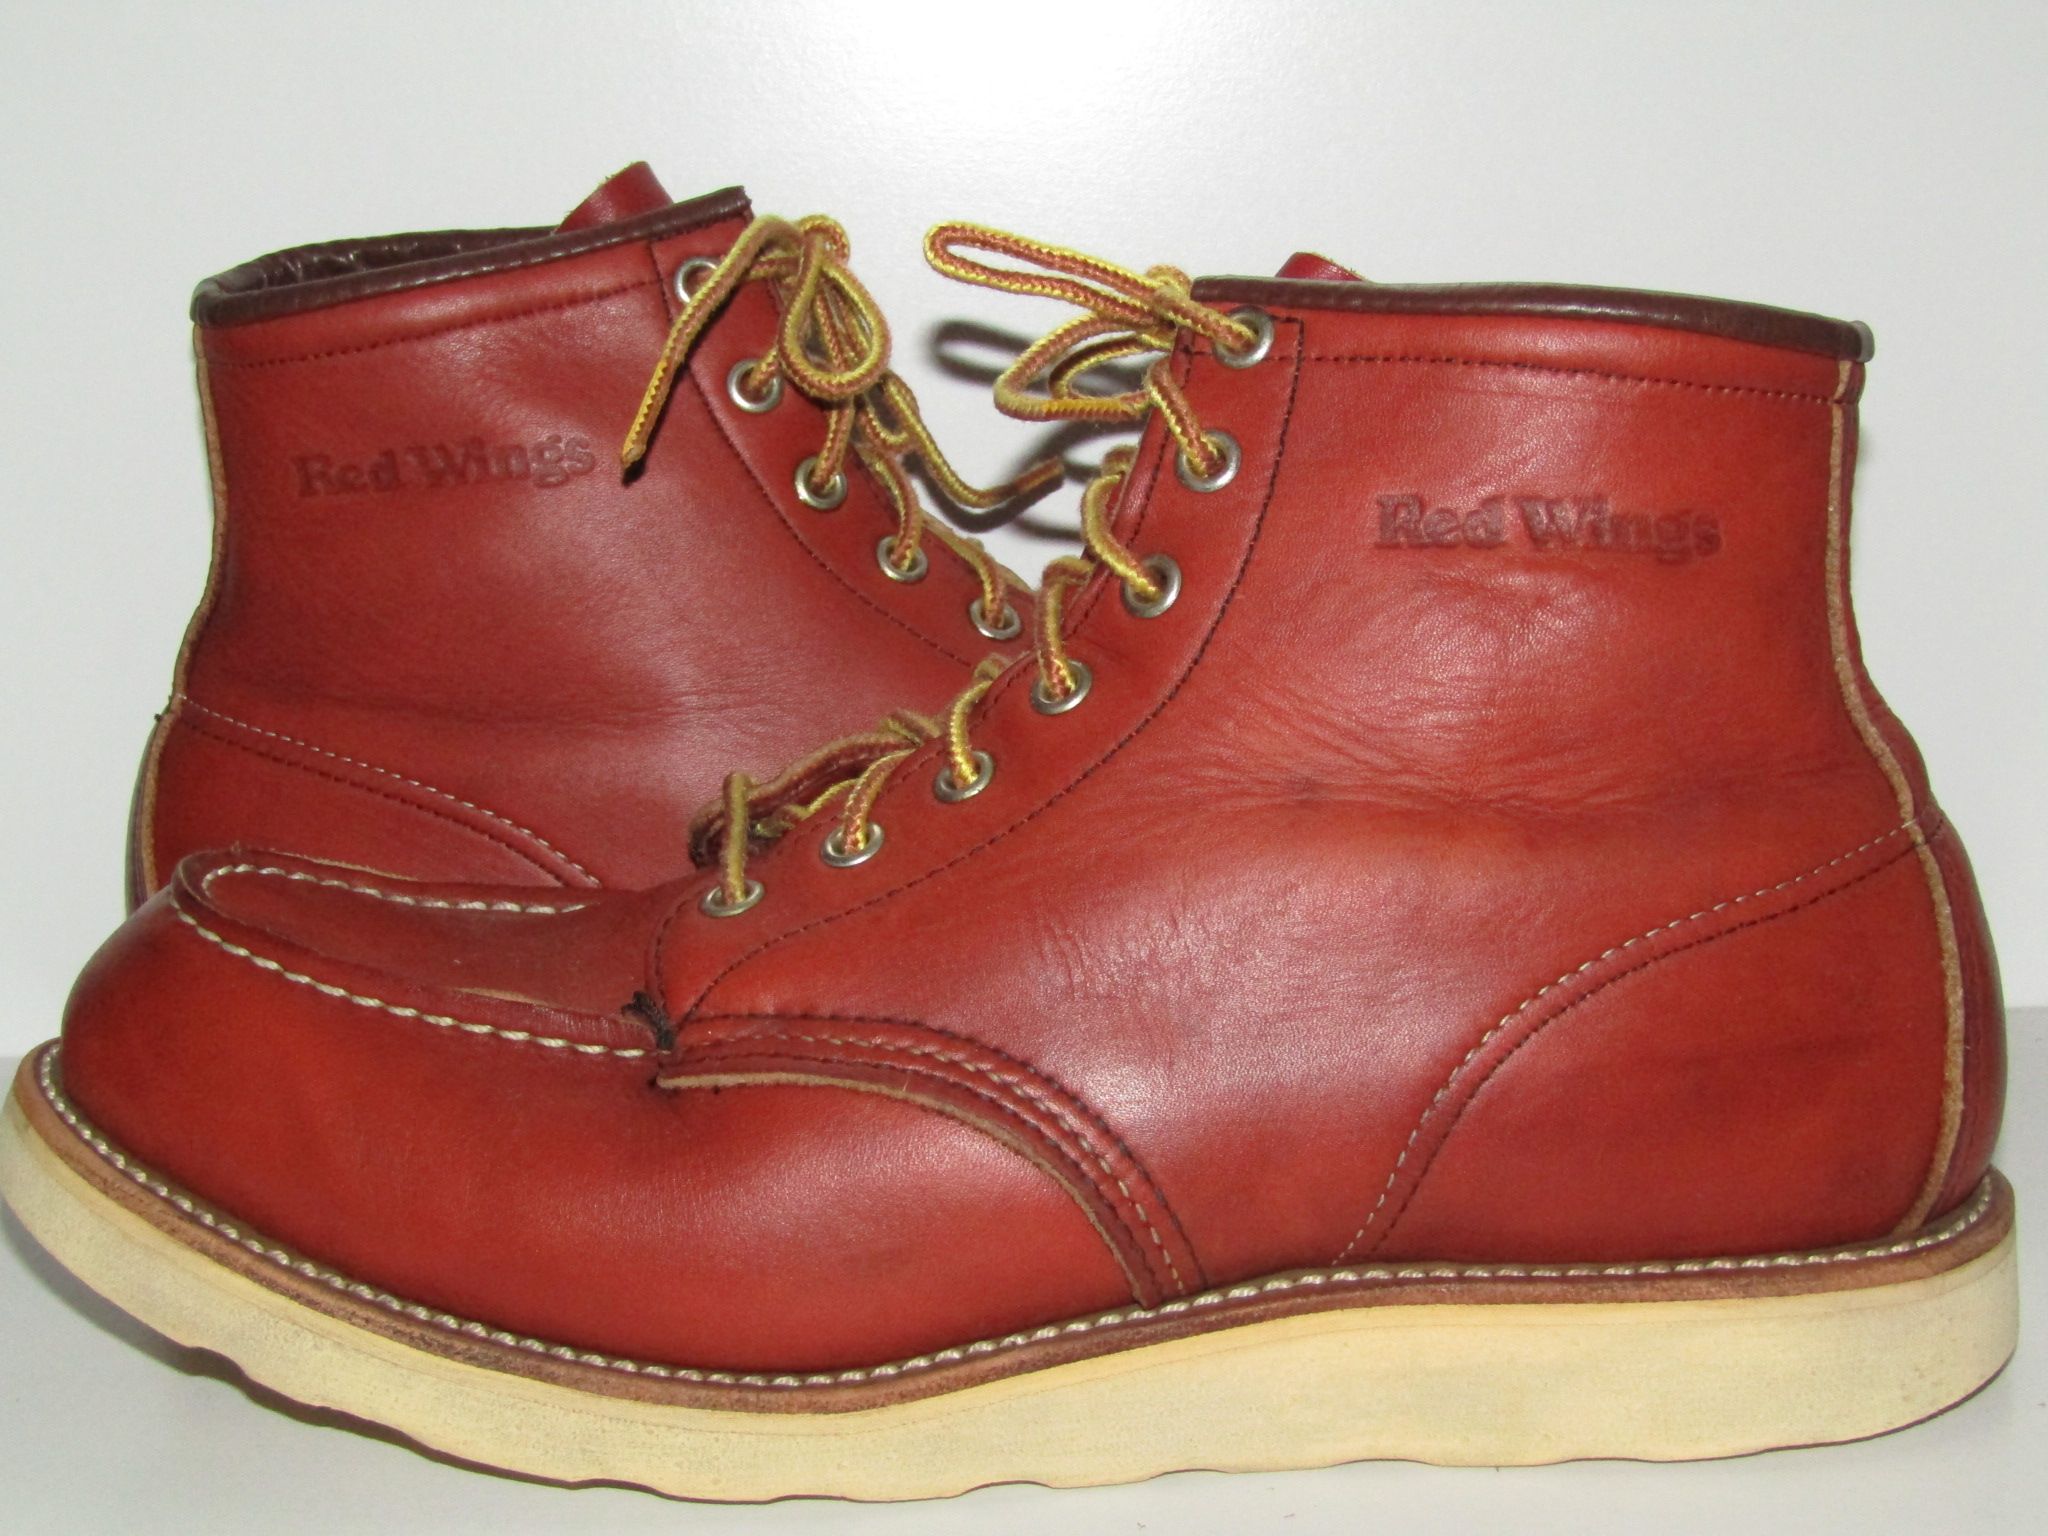 RED WING 9075 サイド羽刻印 - ブーツ